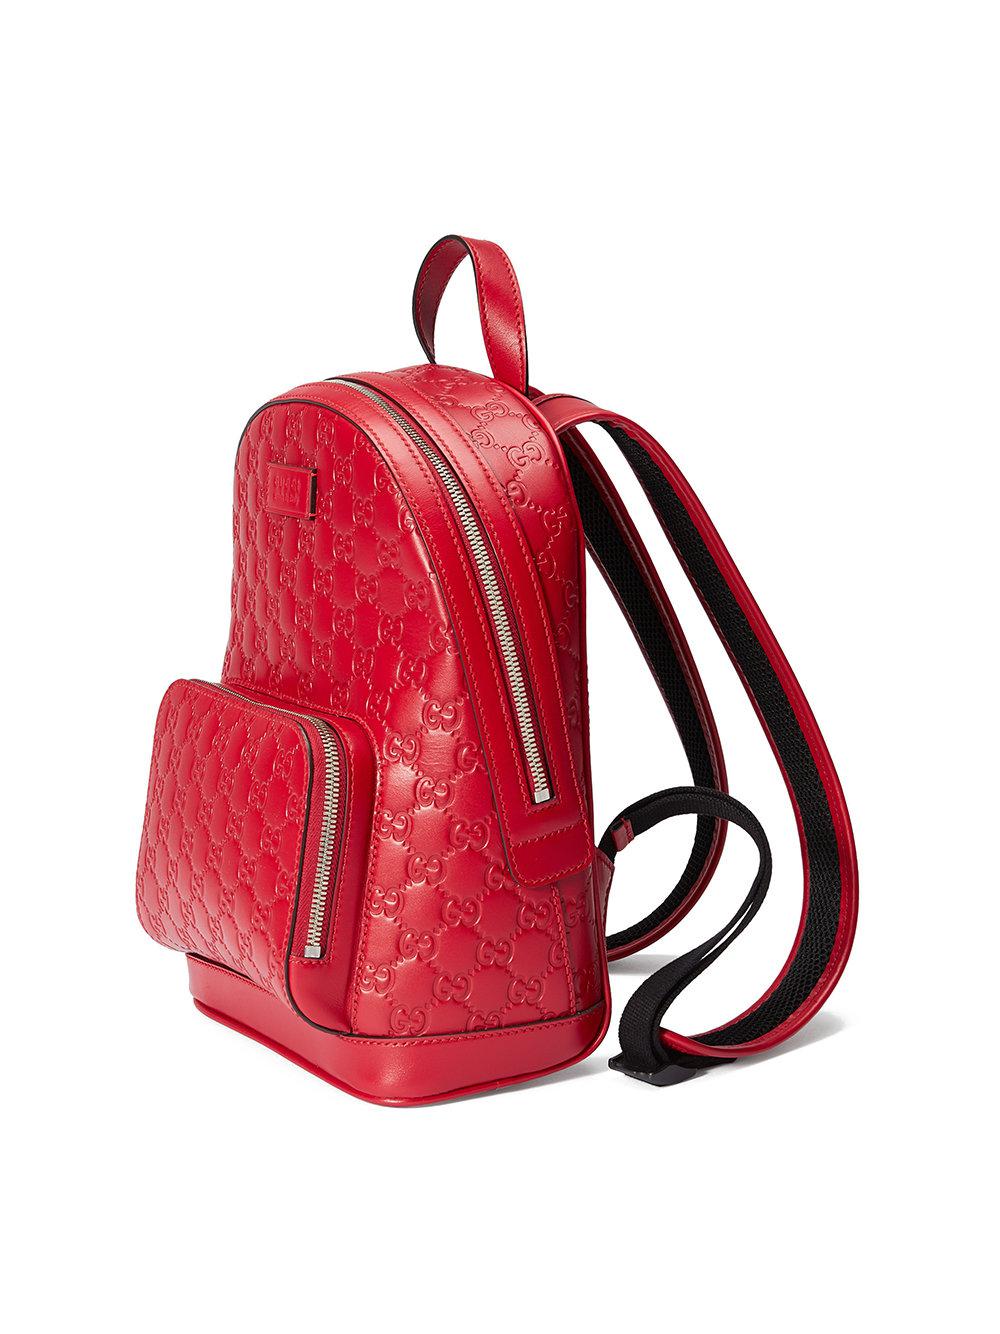 Lyst - Gucci Signature Leather Backpack in Red for Men